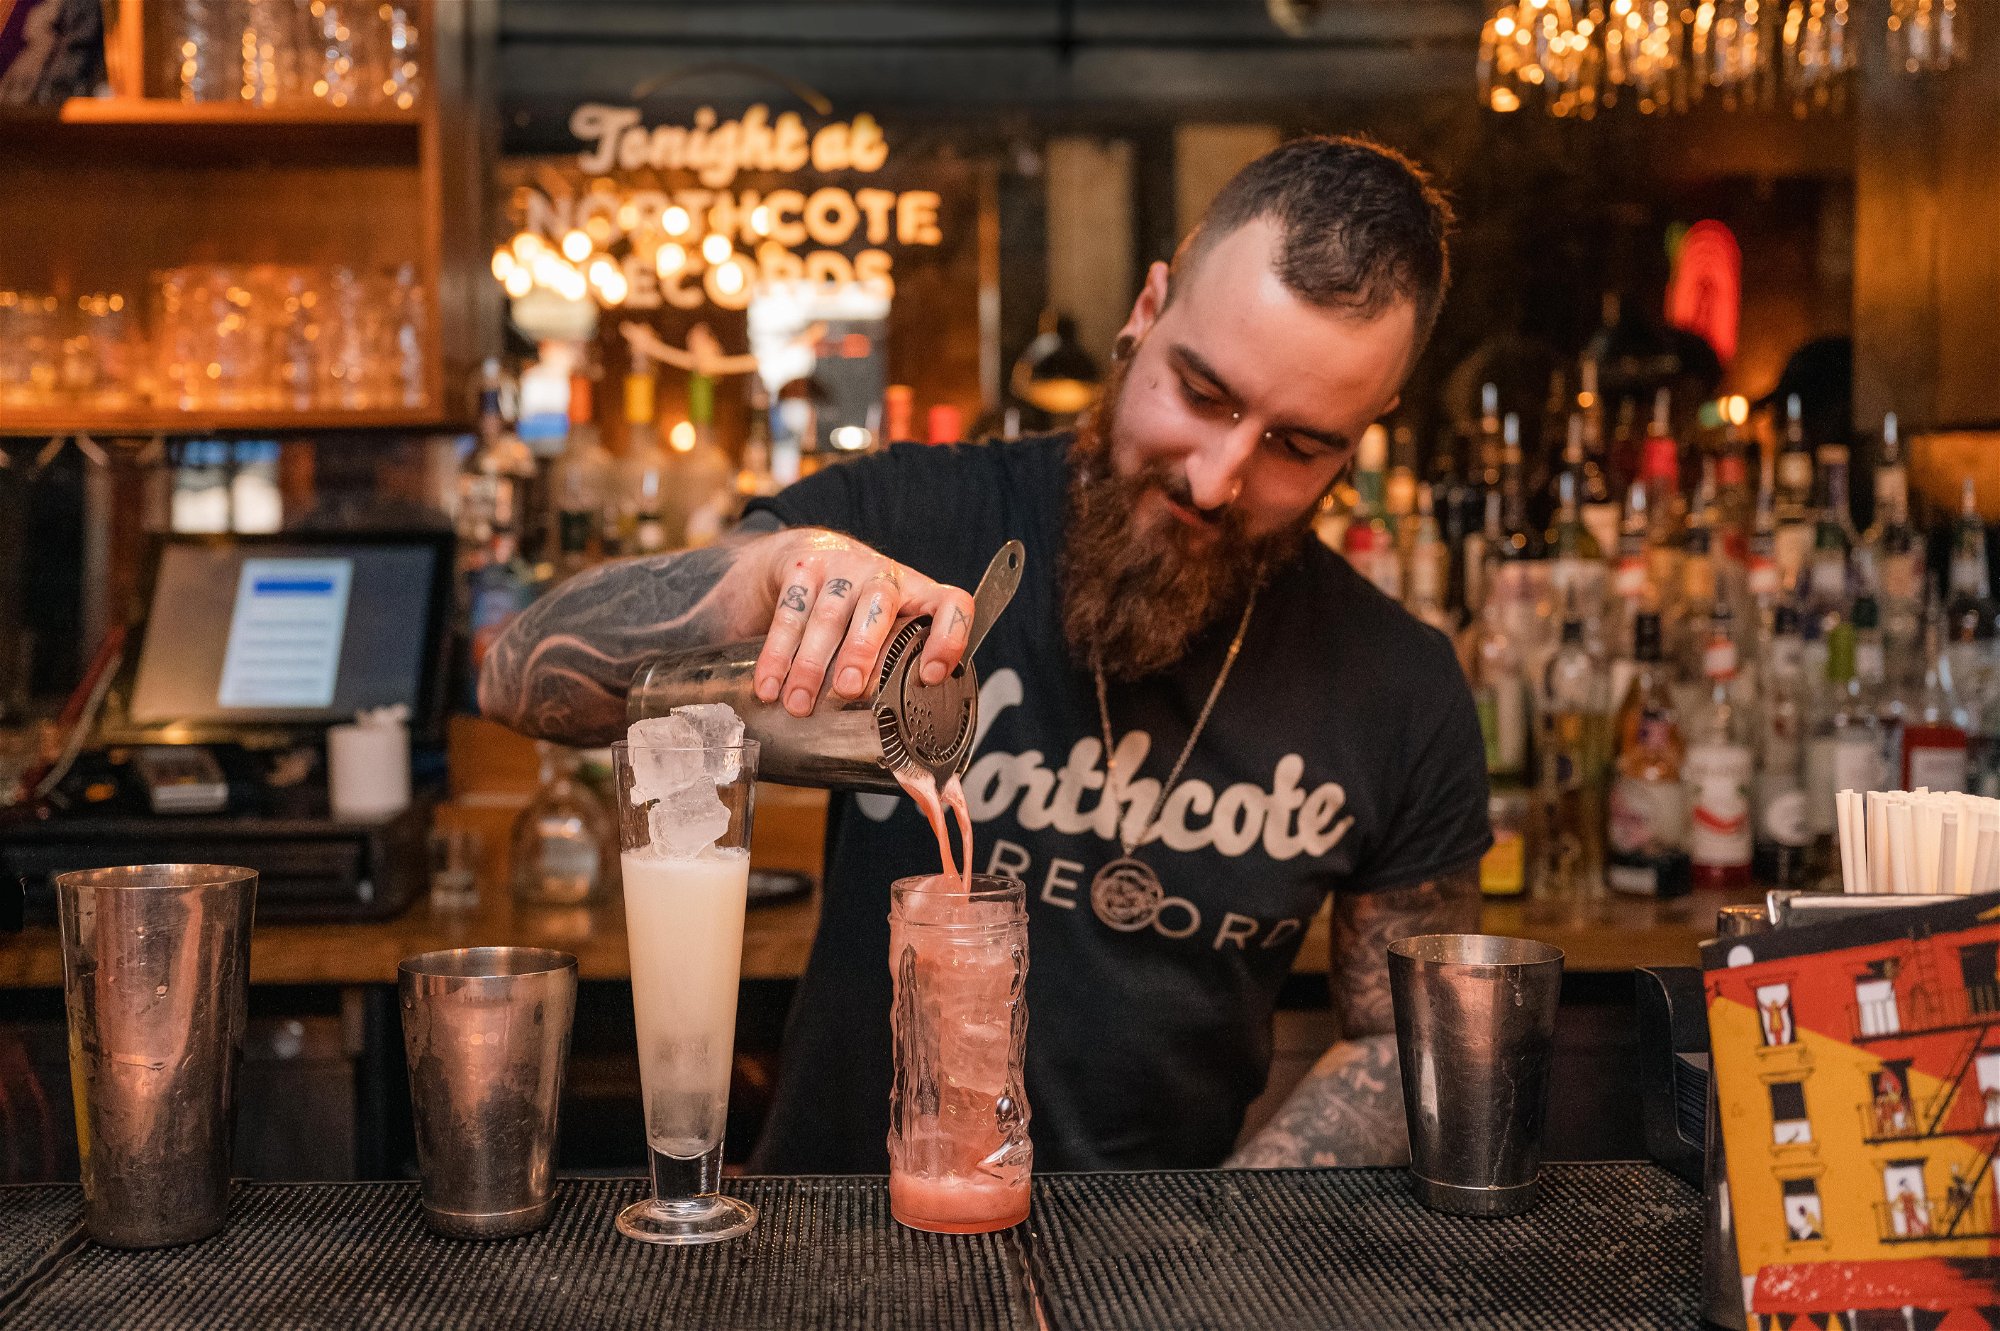 Cocktails being poured by bartender at Northcote Records in Battersea near Clapham Junction.